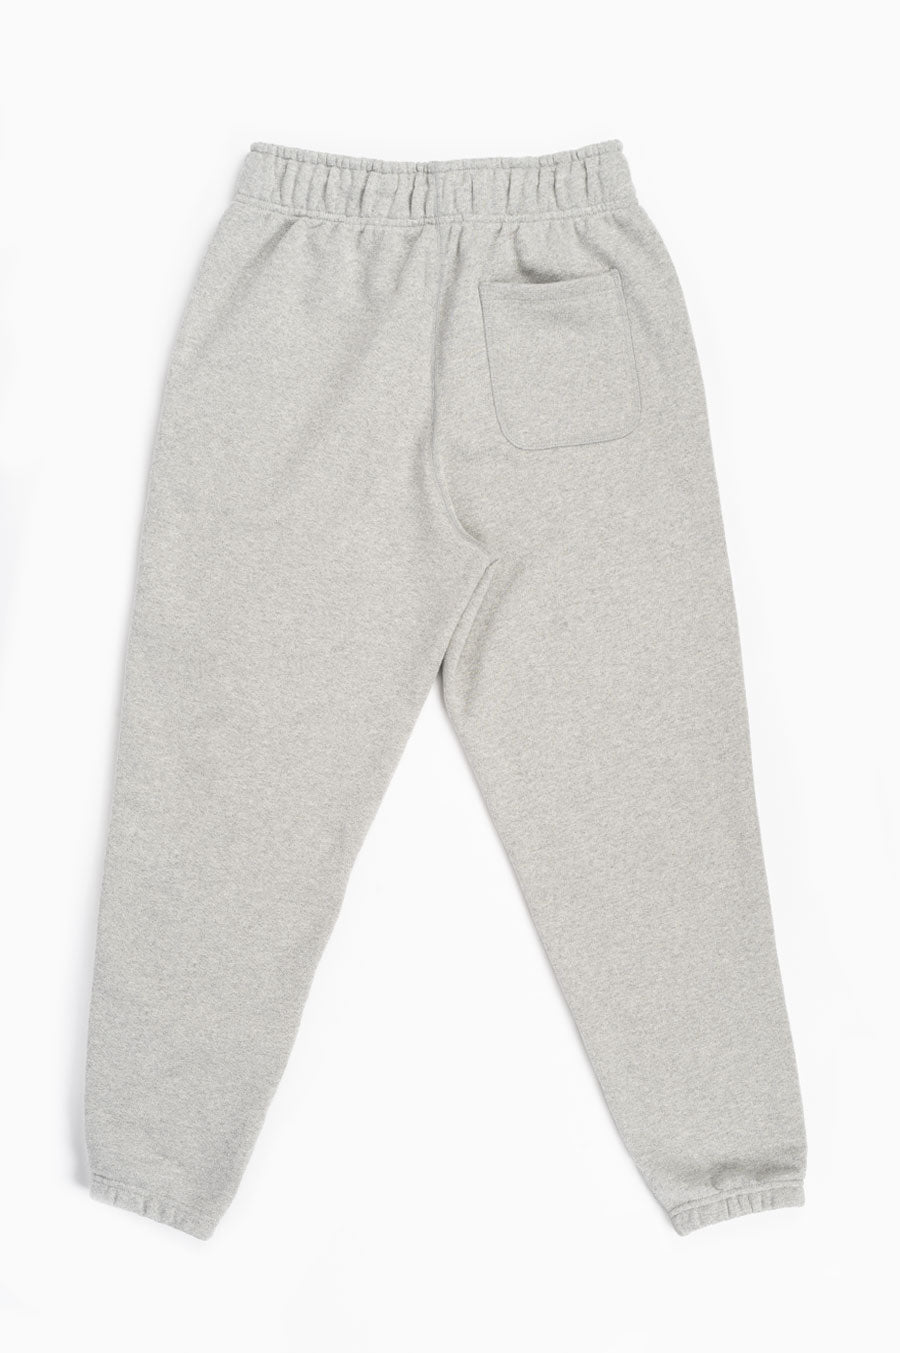 NEW BALANCE MADE ATHLETIC USA SWEATPANT GREY – IN BLENDS